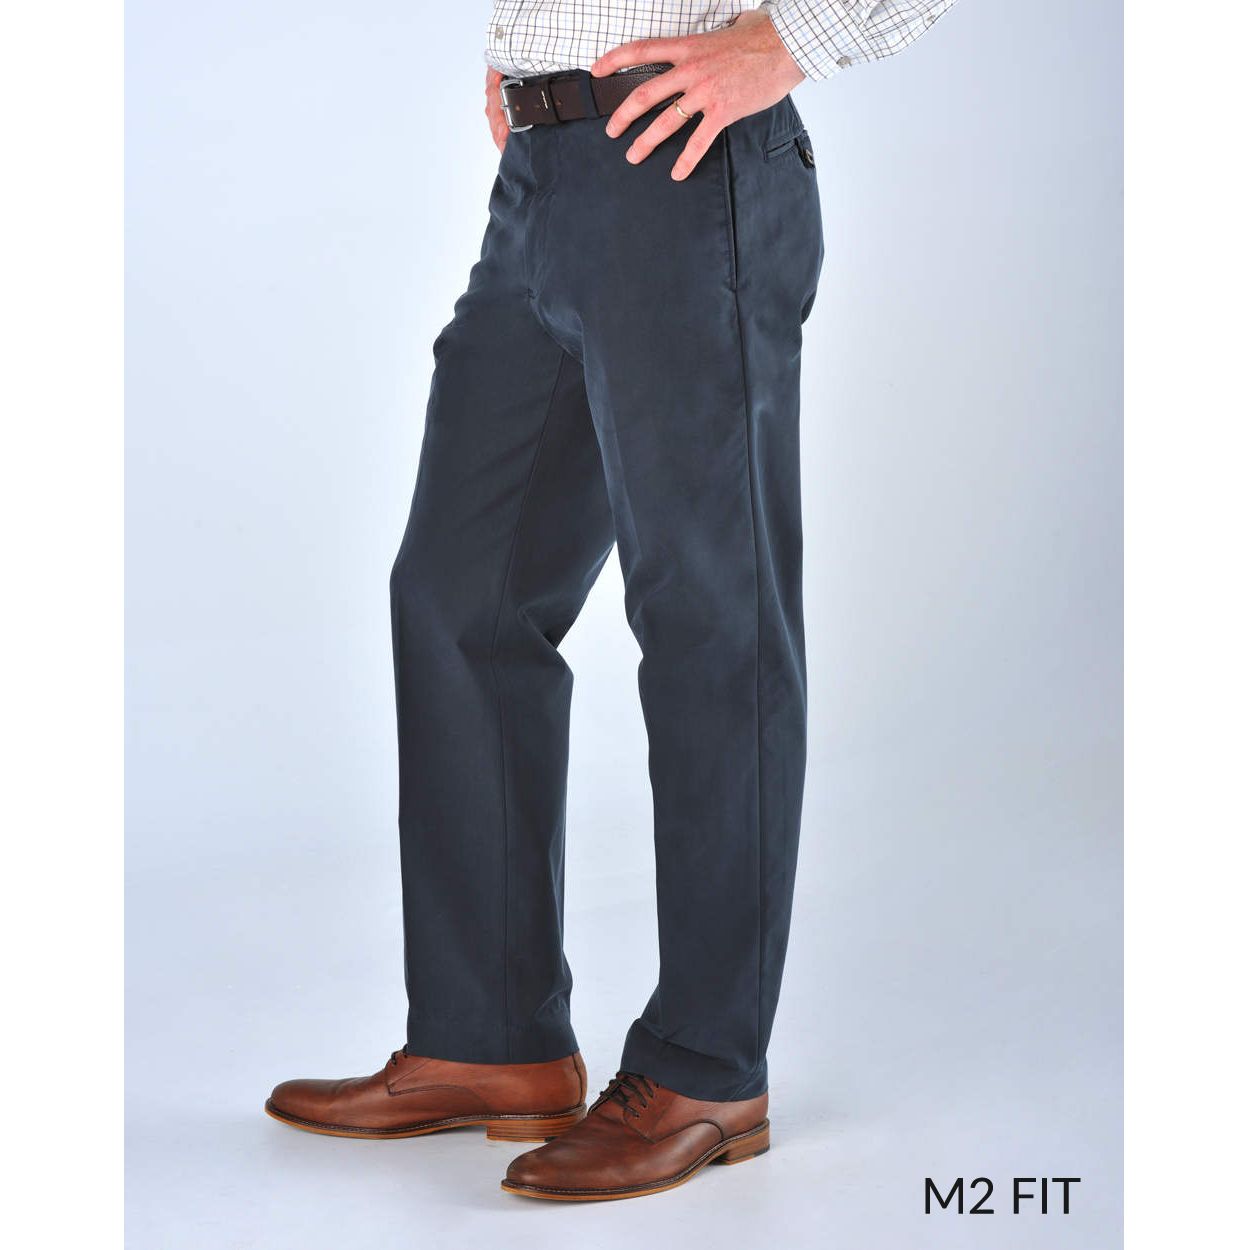 M2 Classic Fit Travel Twills in Cement by Bills Khakis